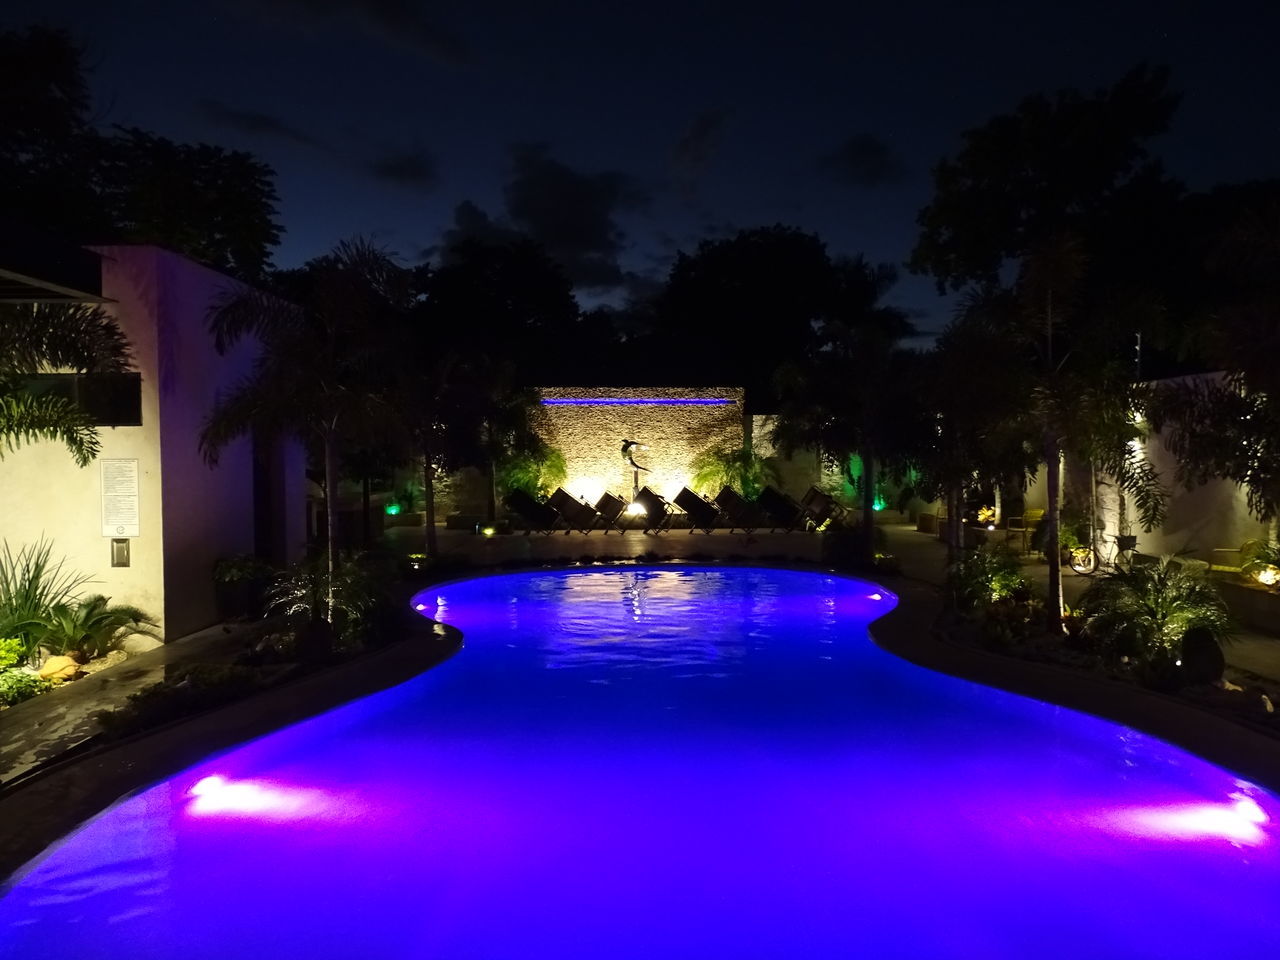 illuminated, tree, plant, night, water, architecture, nature, pool, swimming pool, real people, blue, lifestyles, built structure, people, silhouette, lighting equipment, reflection, leisure activity, men, purple